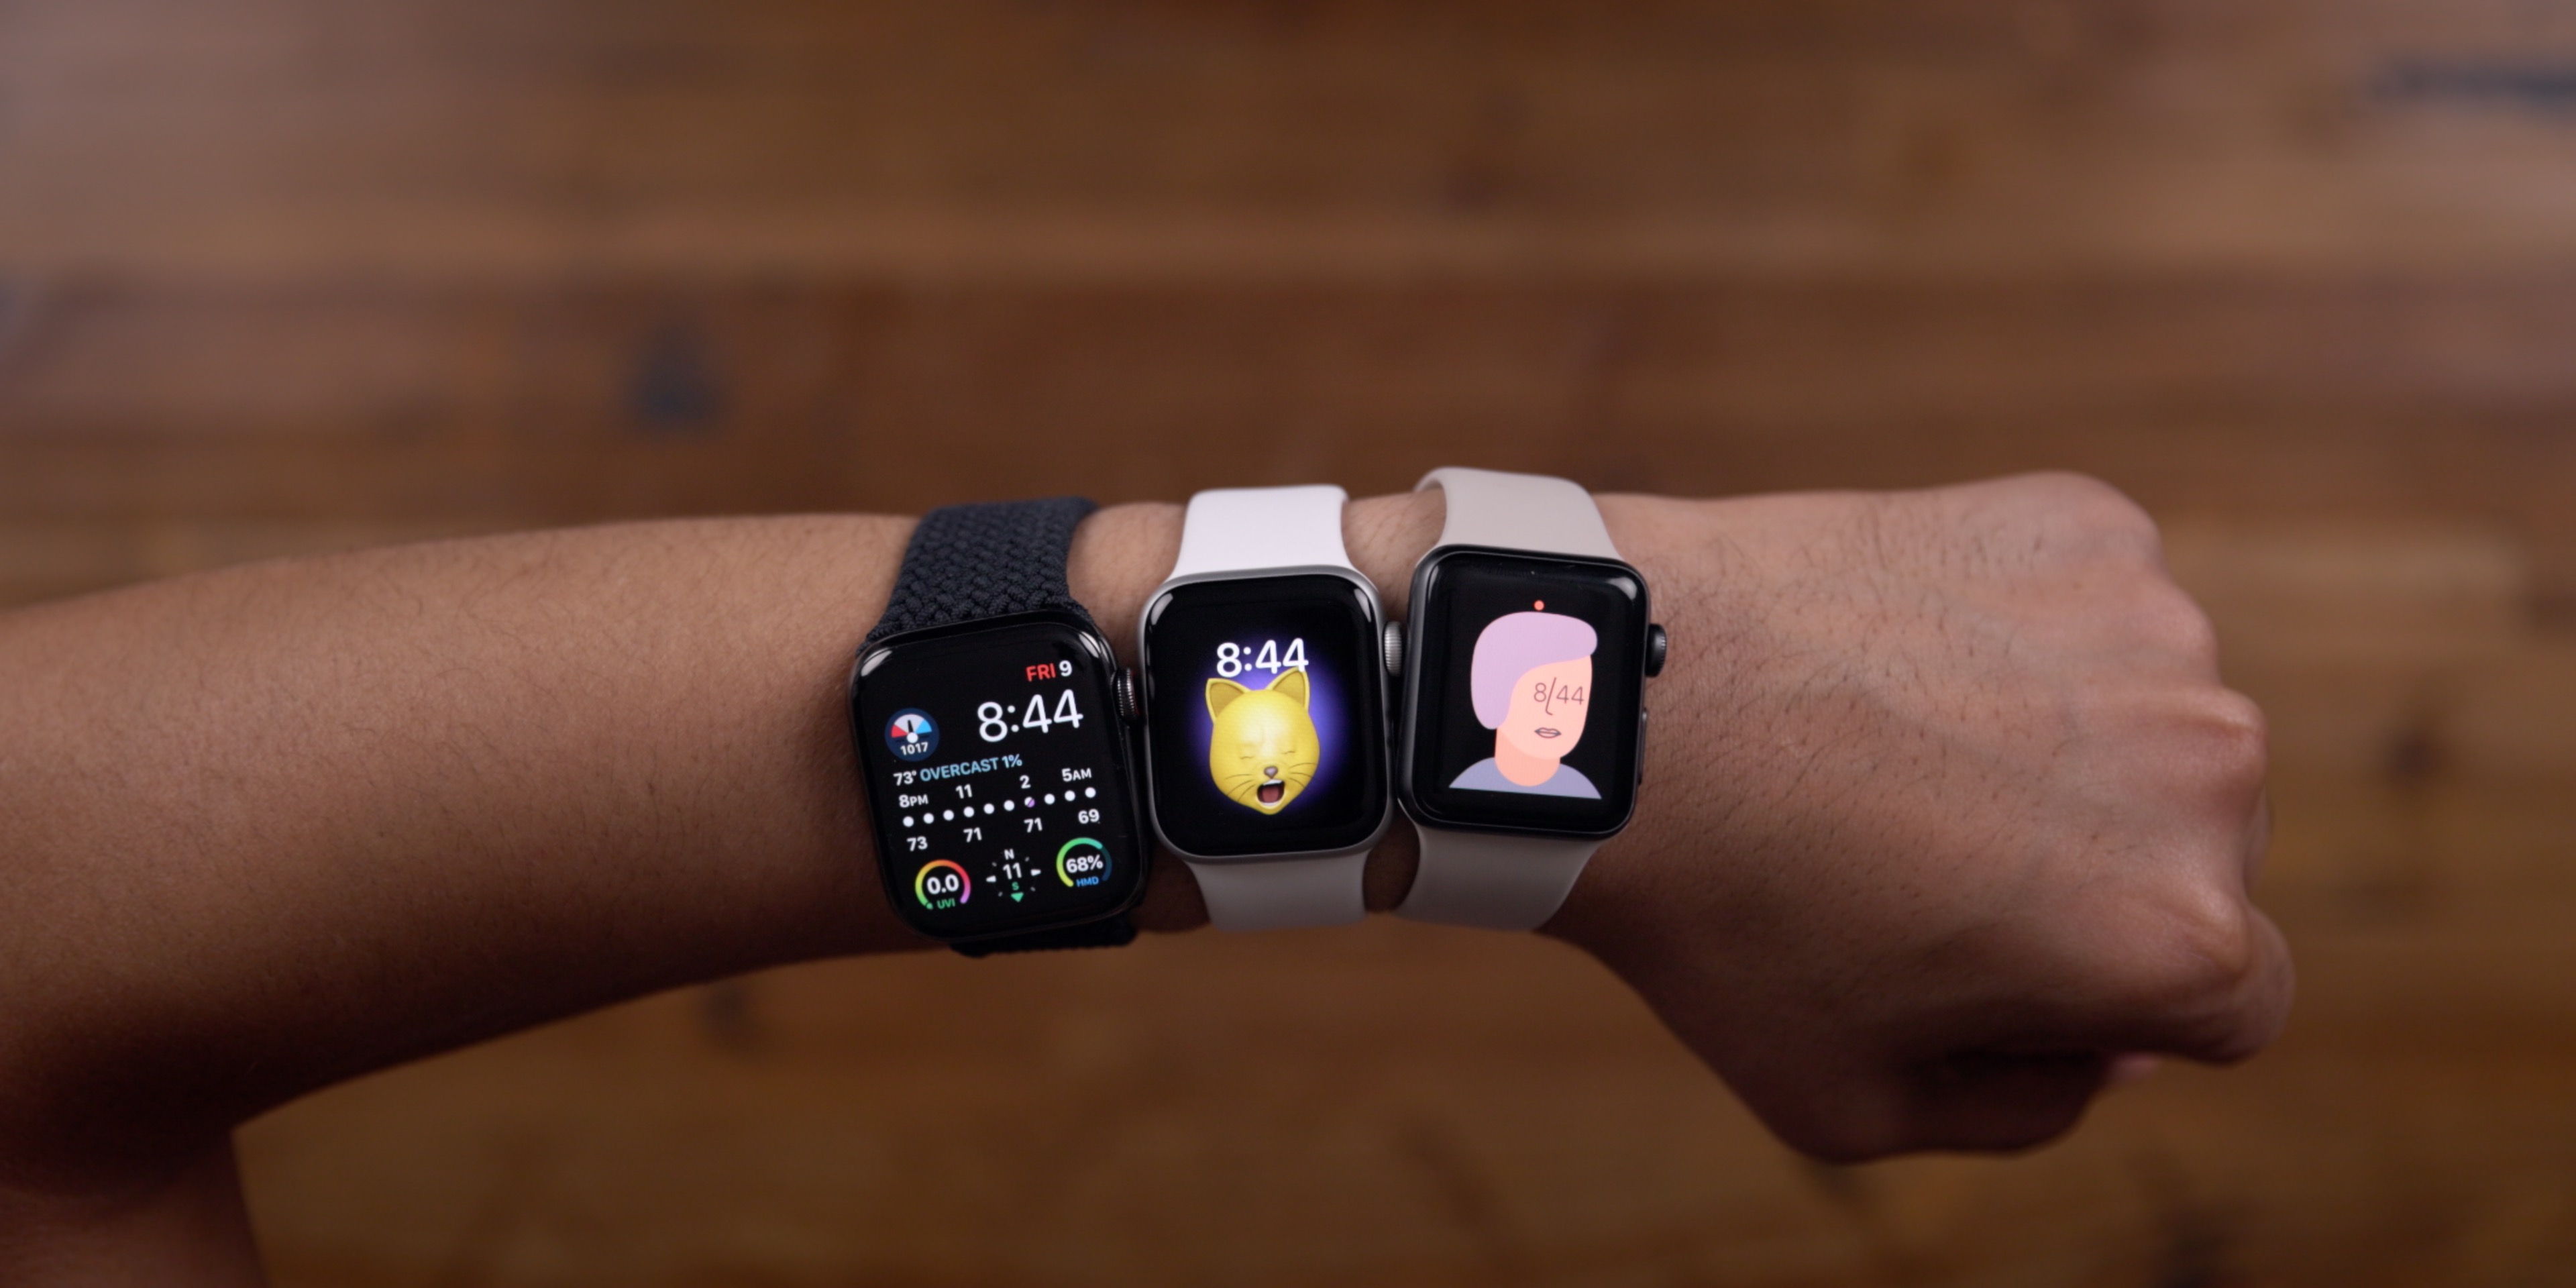 Is it time for custom Apple Watch faces? [Gallery] - 9to5Mac